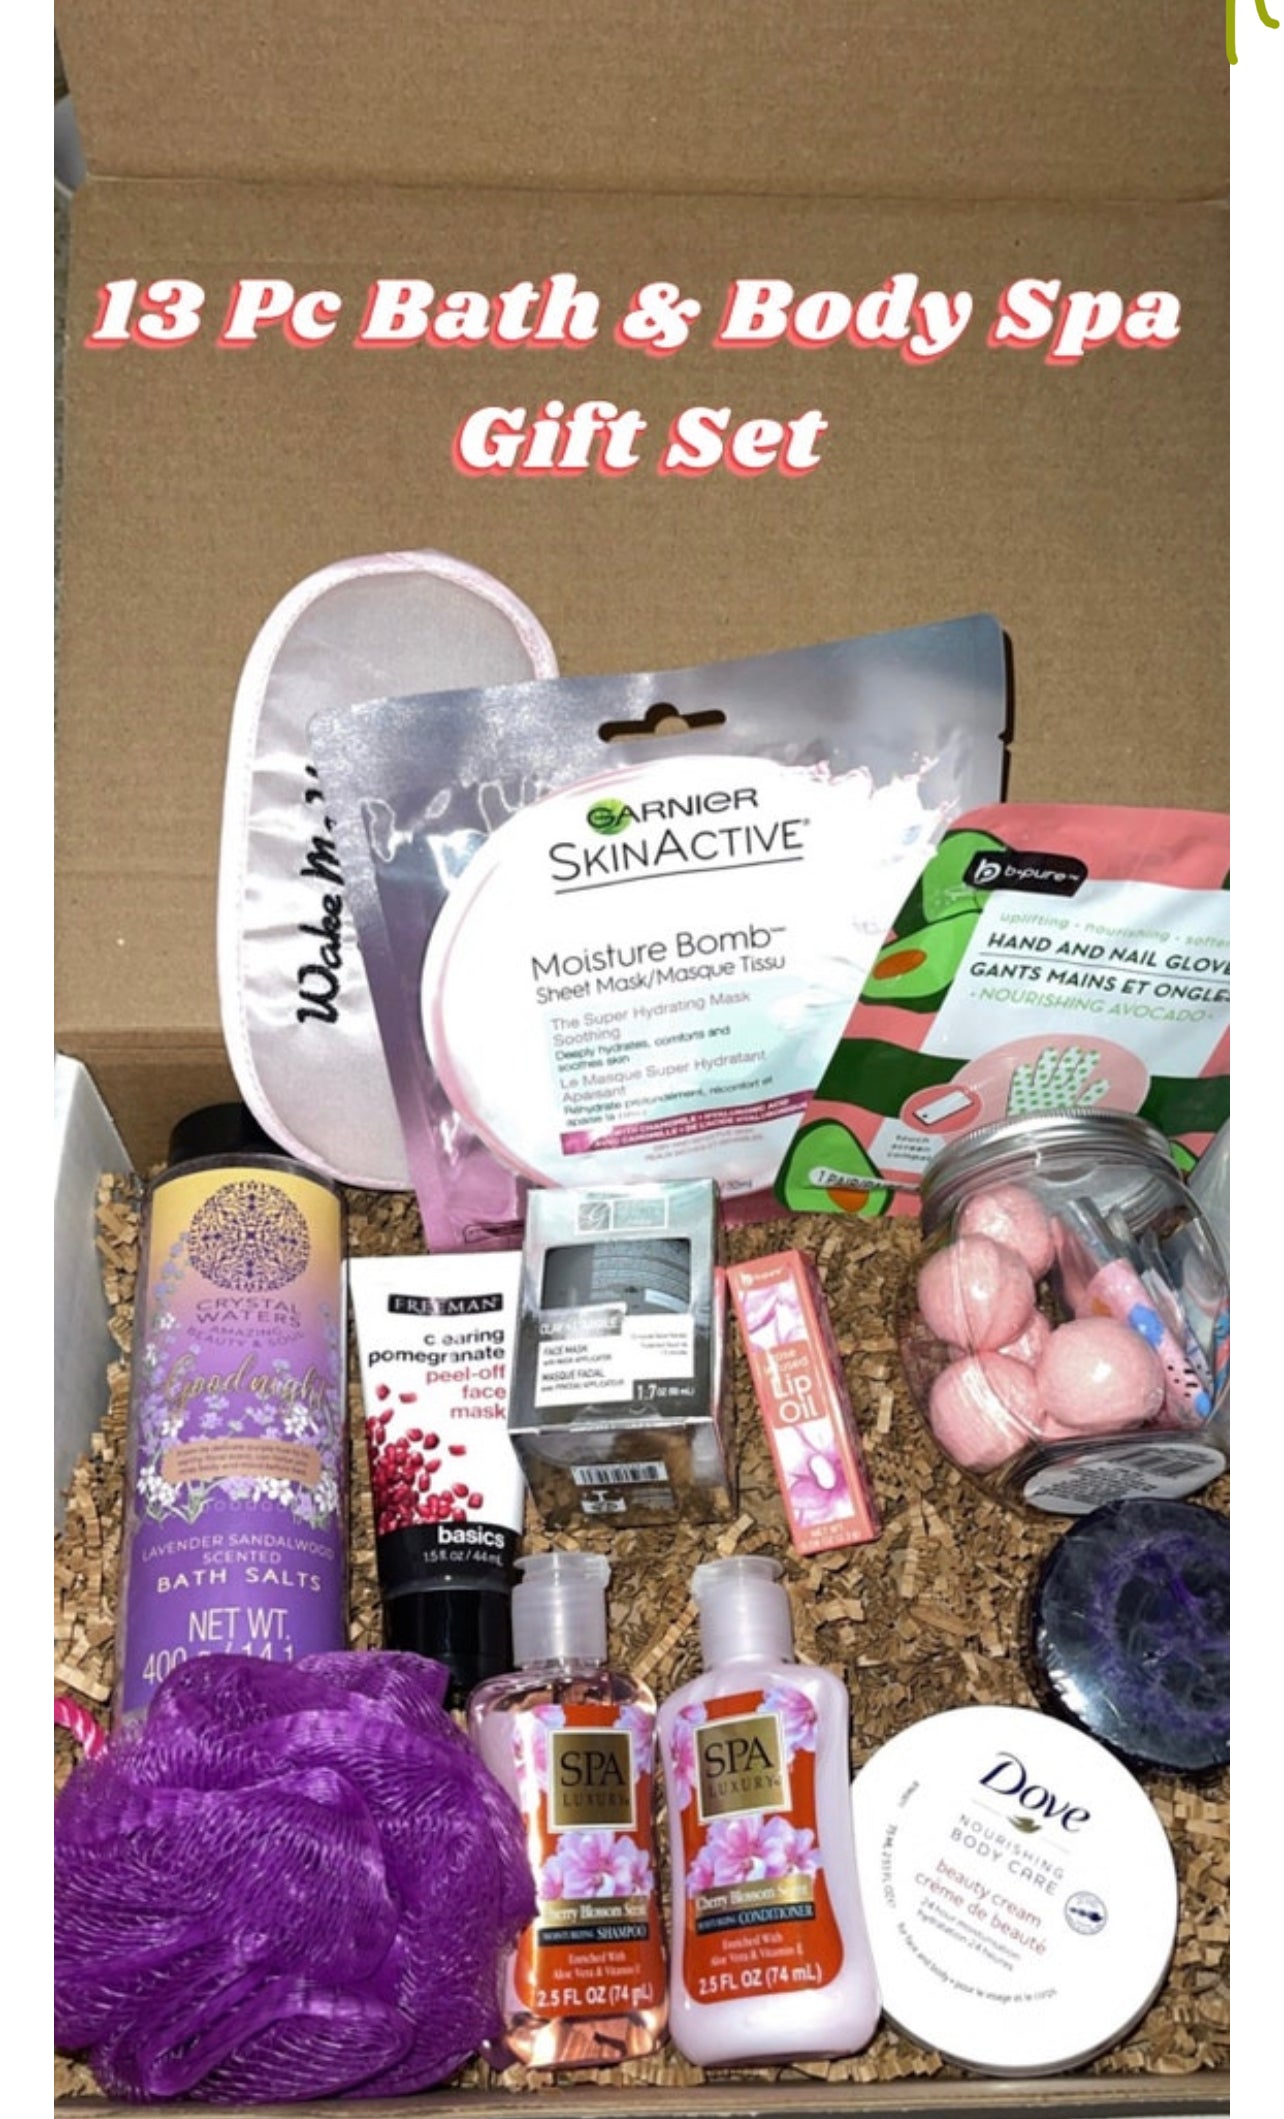 13 Pc body & bath spa gift set Box Valentine’s Day Birthday Shower Get well any occasion gift sets